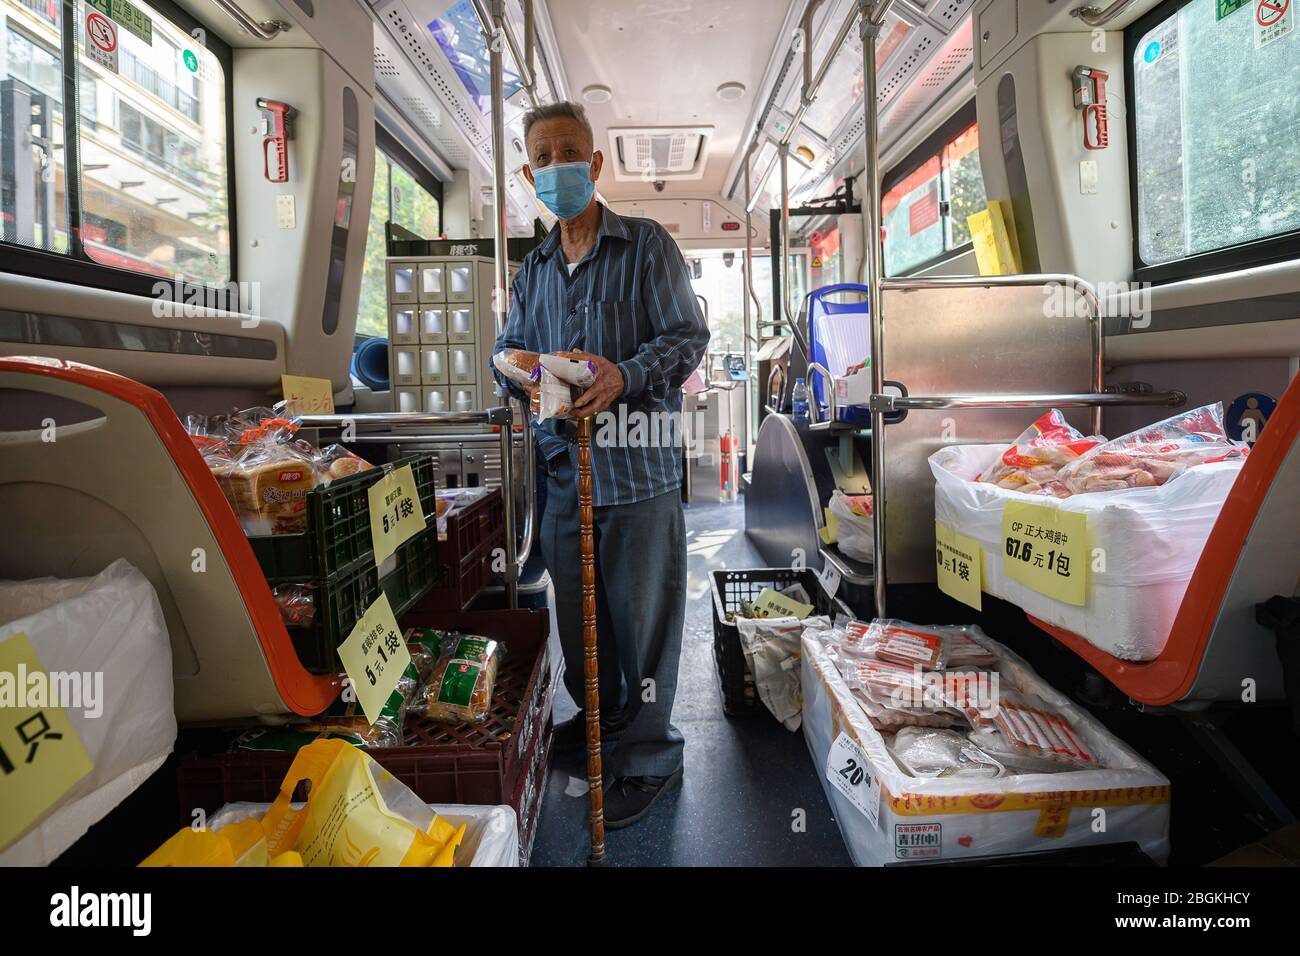 Residents purchase at the bus supermarket, which is a cooperation of local bus service and supermarket for citizens' convenience, Guangzhou city, sout Stock Photo